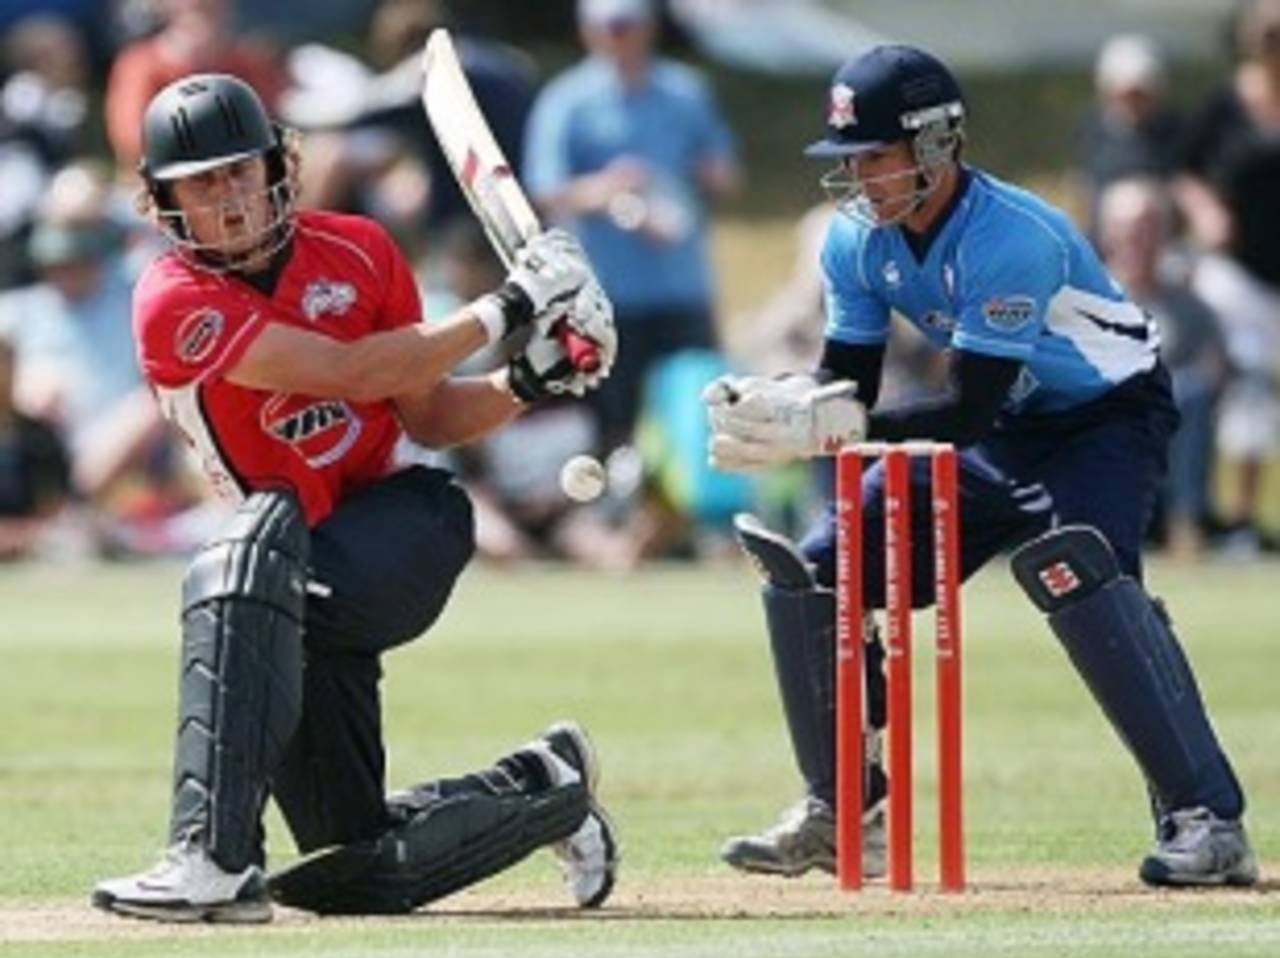 Northerns' Rob Nicol is in the mix&nbsp;&nbsp;&bull;&nbsp;&nbsp;Getty Images